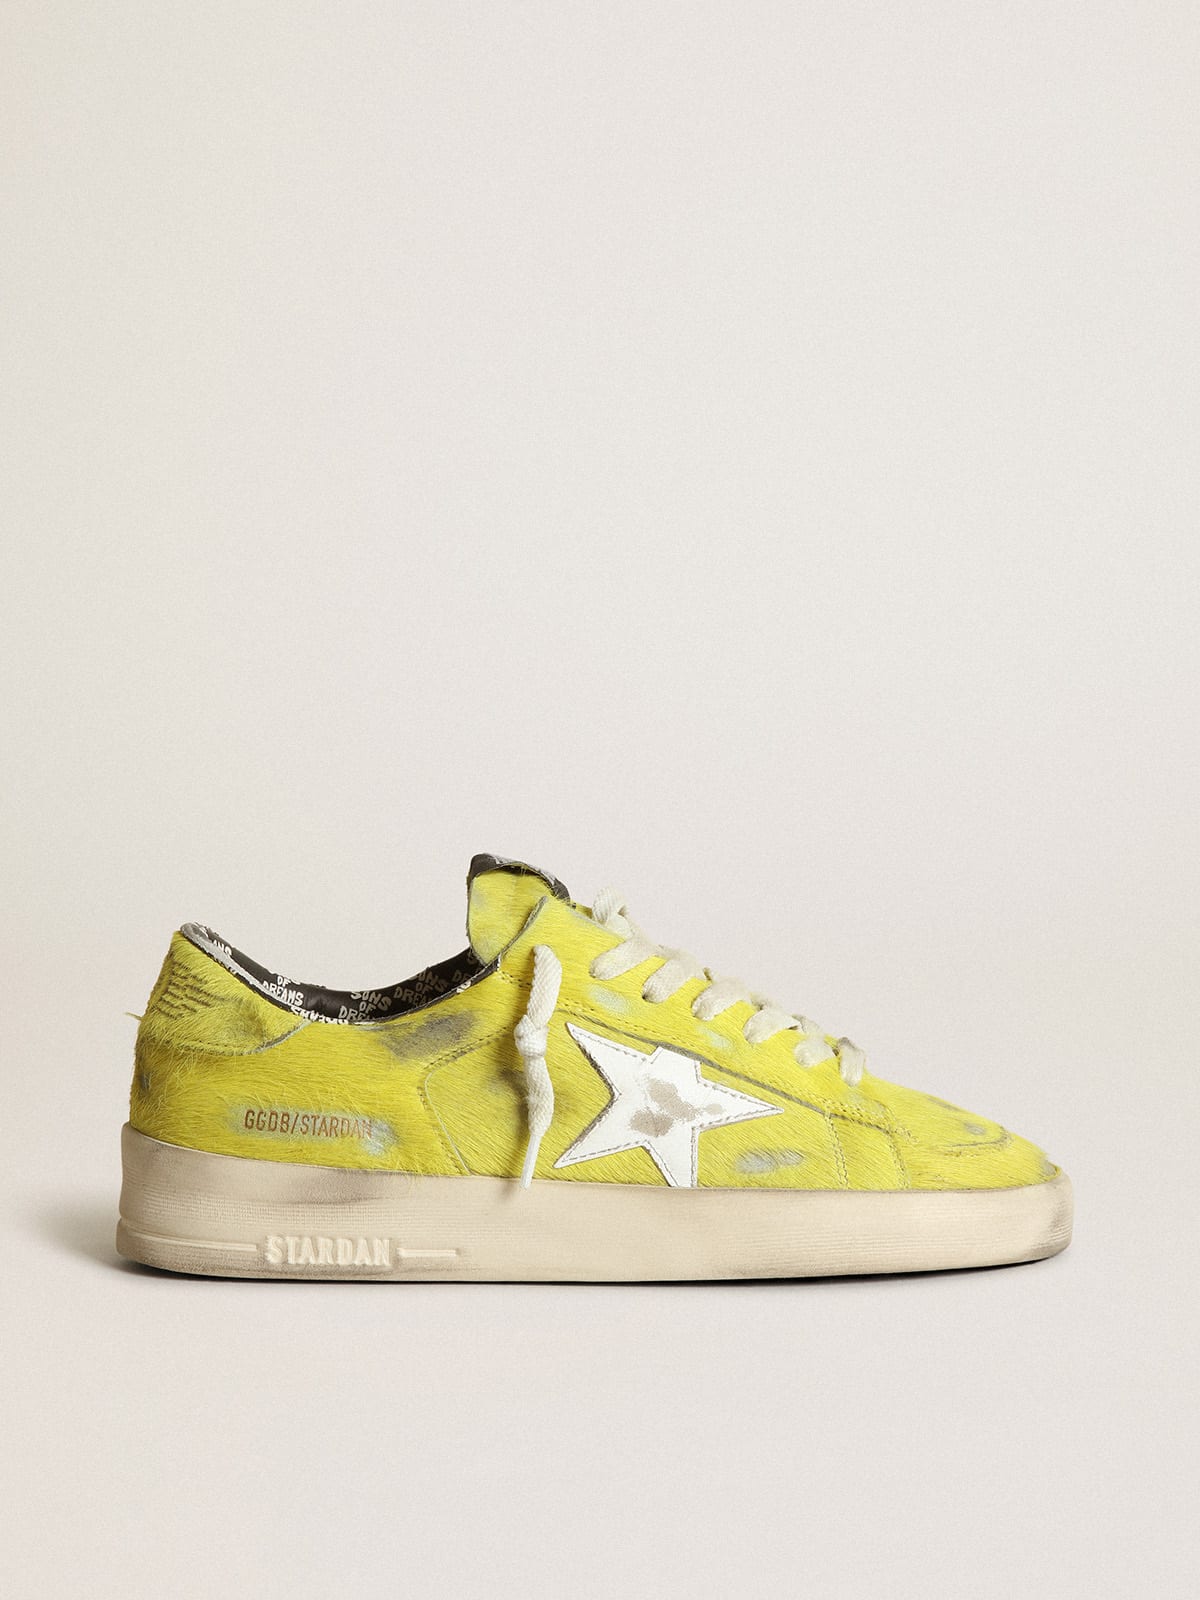 Golden Goose - Women’s Stardan sneakers in fluorescent yellow pony skin with white leather star in 